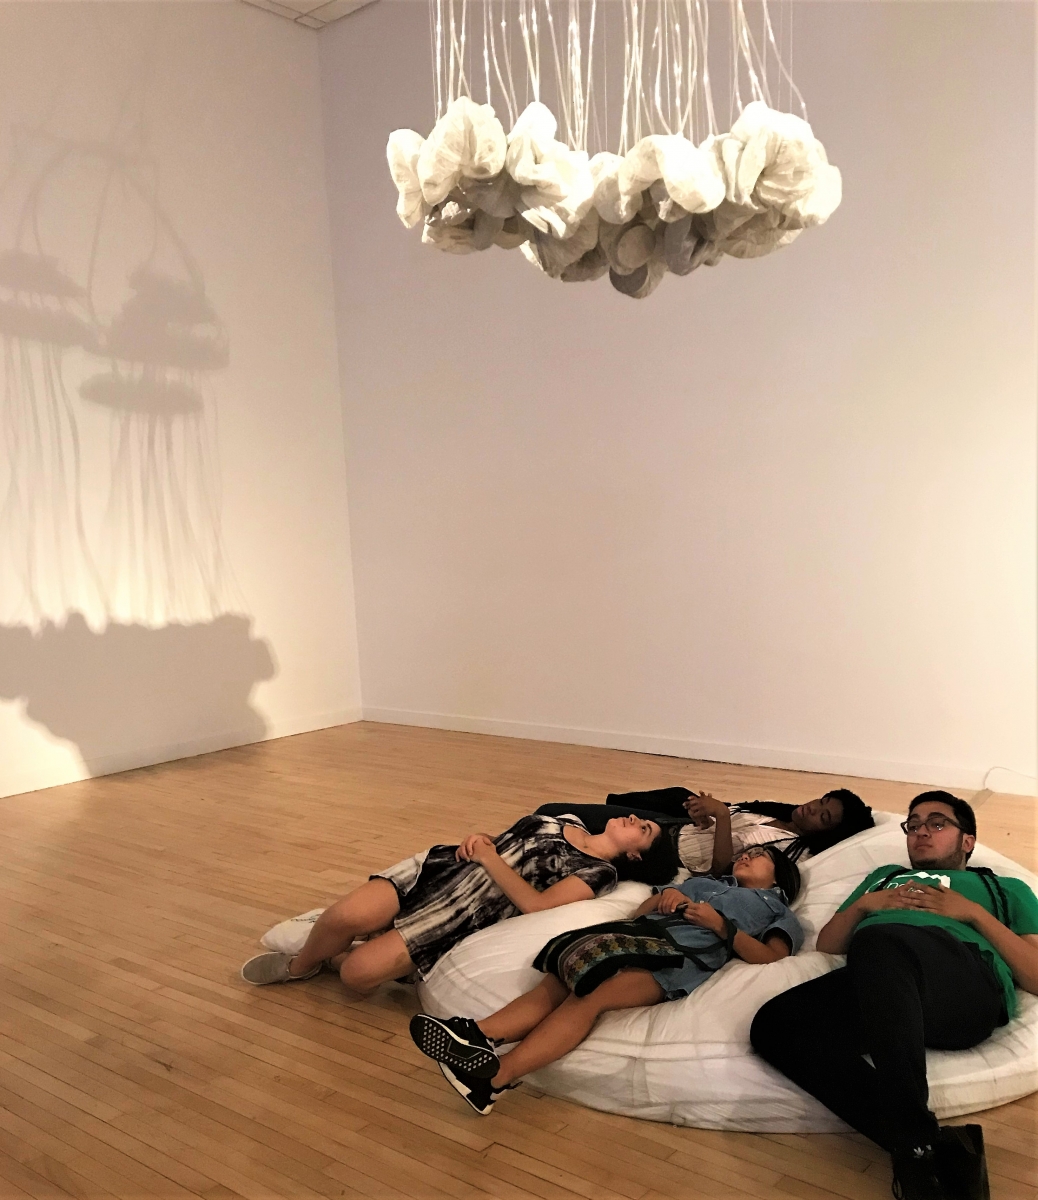 DIAL 2019 interns enjoying an interactive art exhibit during a site visit at The Bronx Museum, one of the arts host locations. Experiences like this will be difficult to facilitate in the virtual version of the internship. Photo by Ami Scherson.